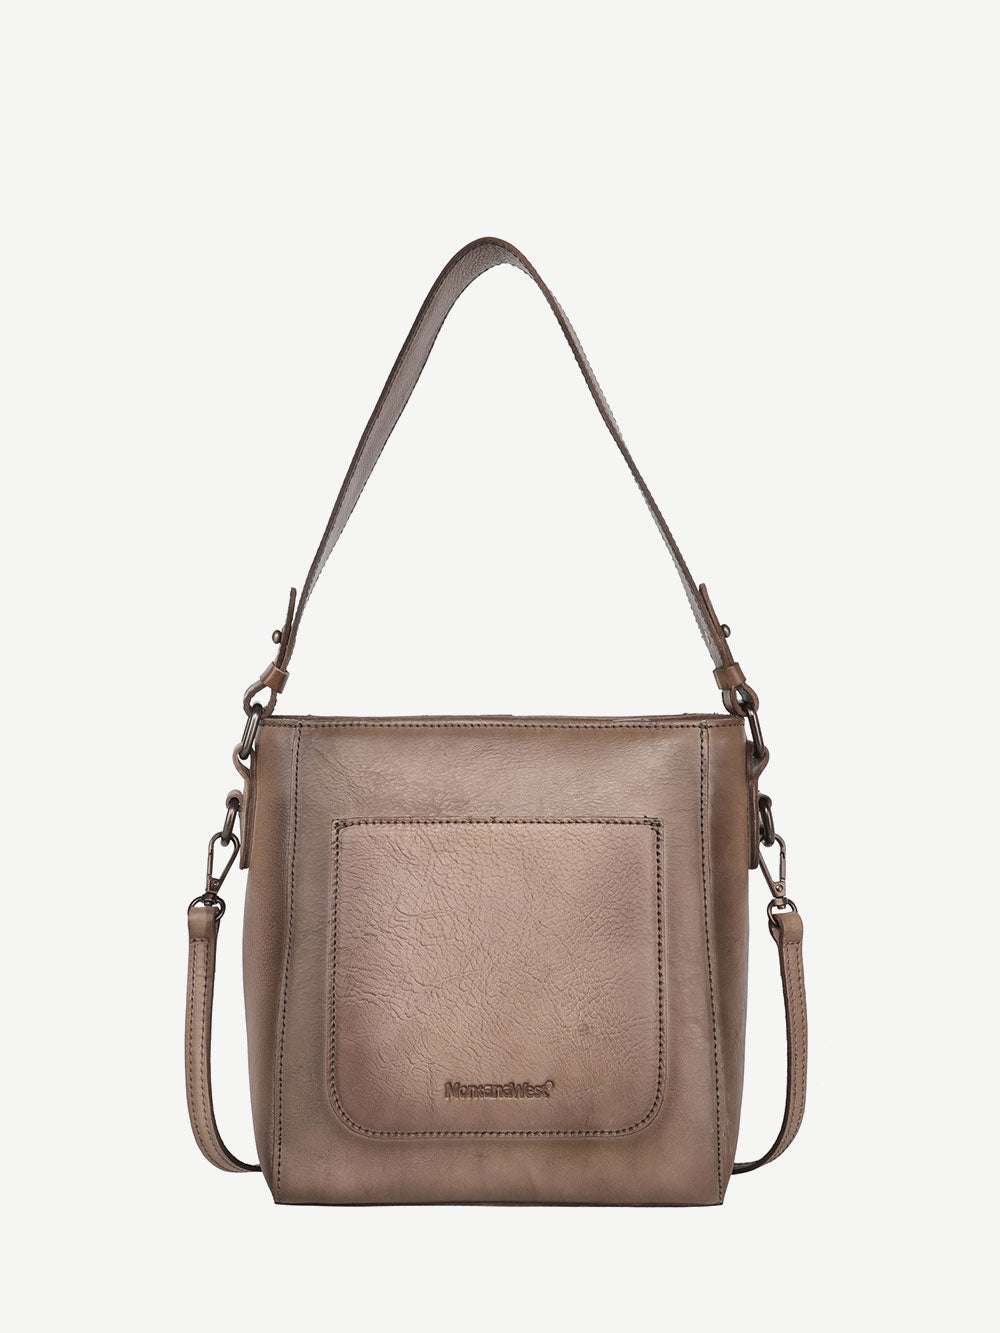 Montana West Genuine Leather Laser Cut-out Crossbody Hobo